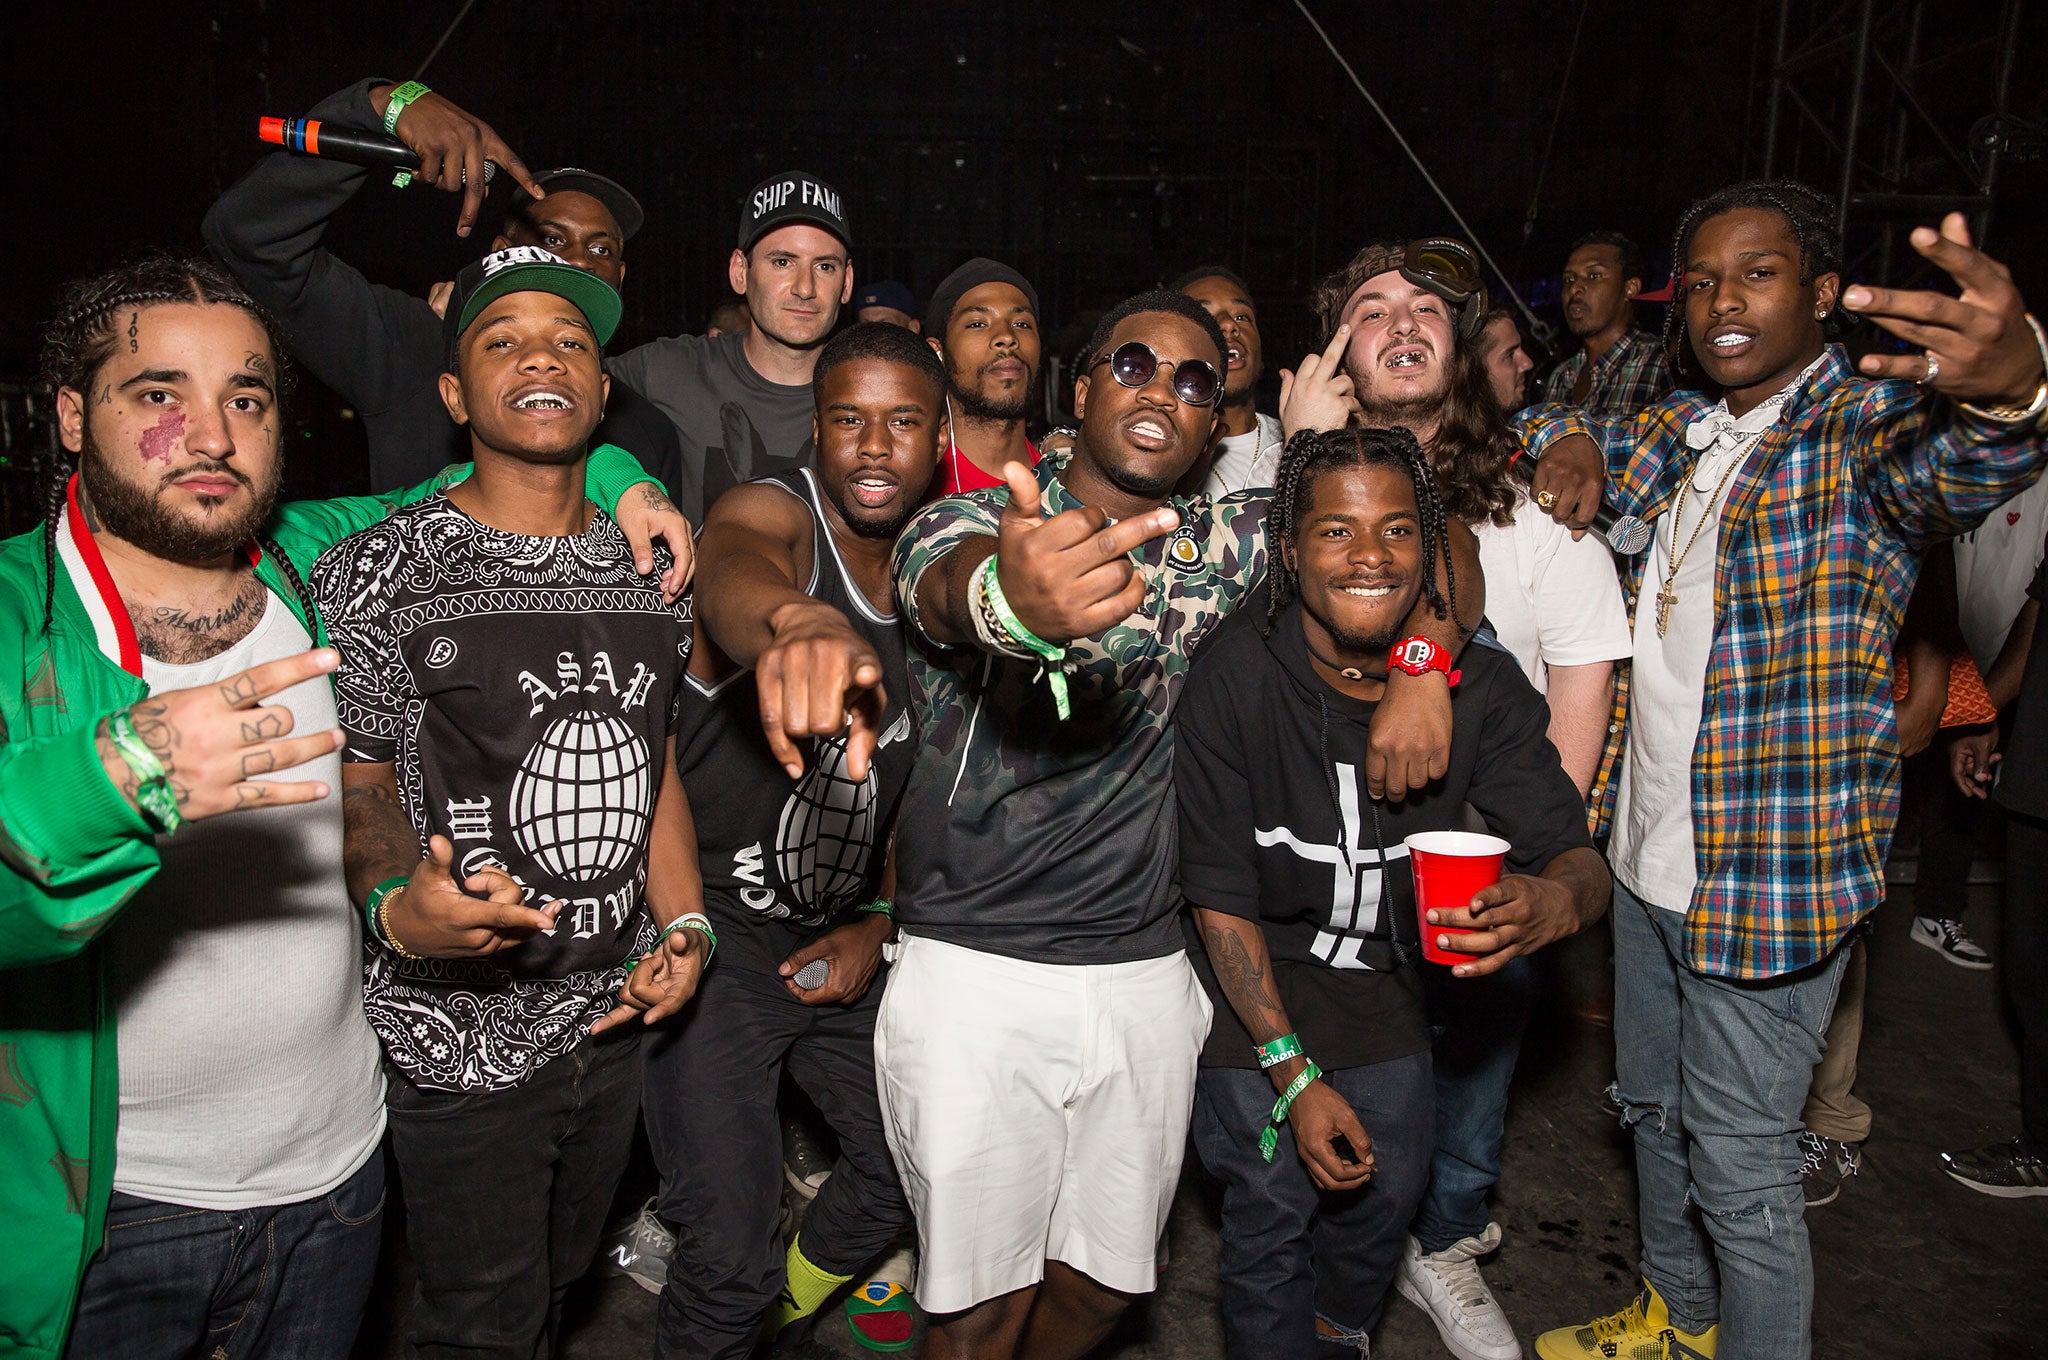 ASAP Yams, far left, pictured with other members of the ASAP Mob in August 2014